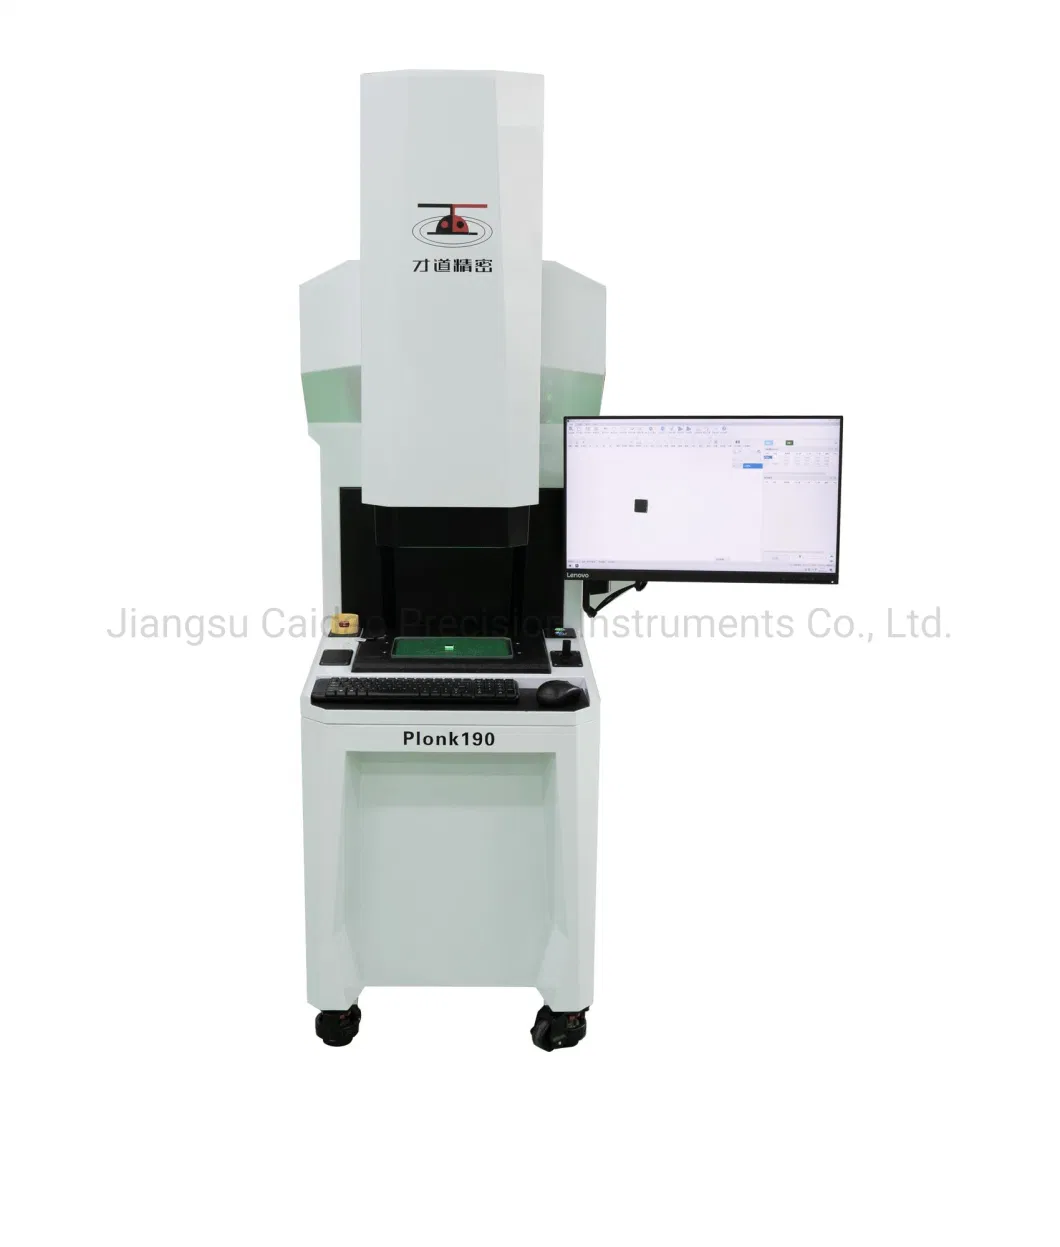 Optical Coordinate Measuring Machine for RFID Electronic Tags Inspection Plonk 190